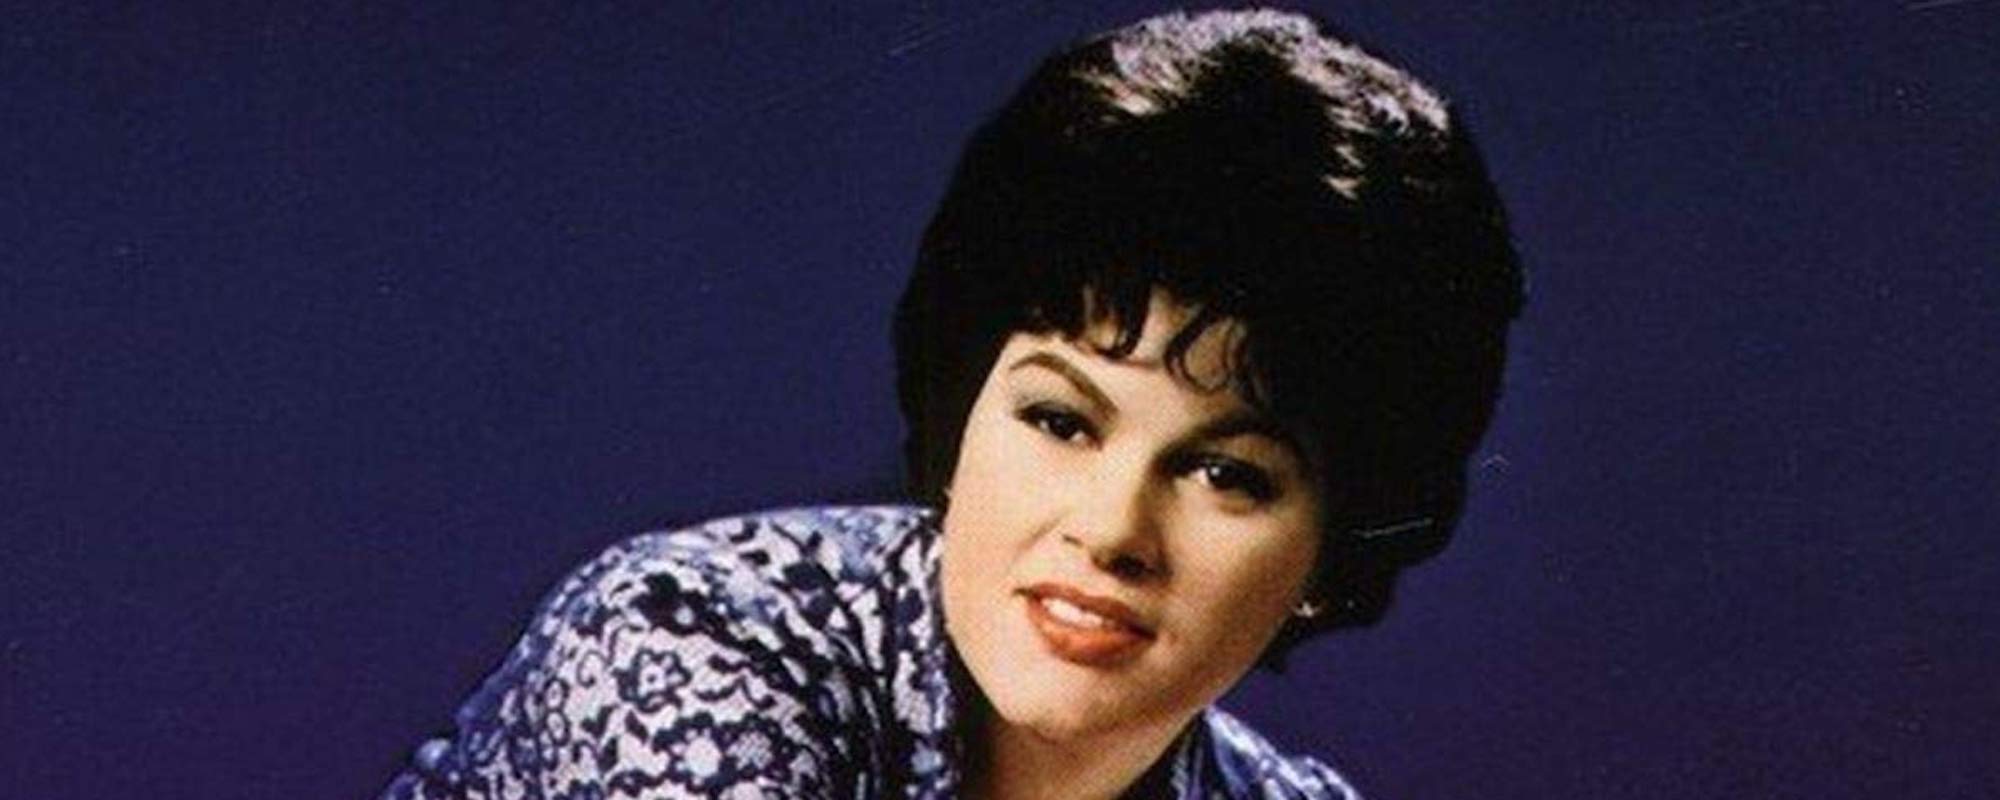 Books on Patsy Cline, Jimmie Rodgers Re-Issued by Country Music Hall of Fame